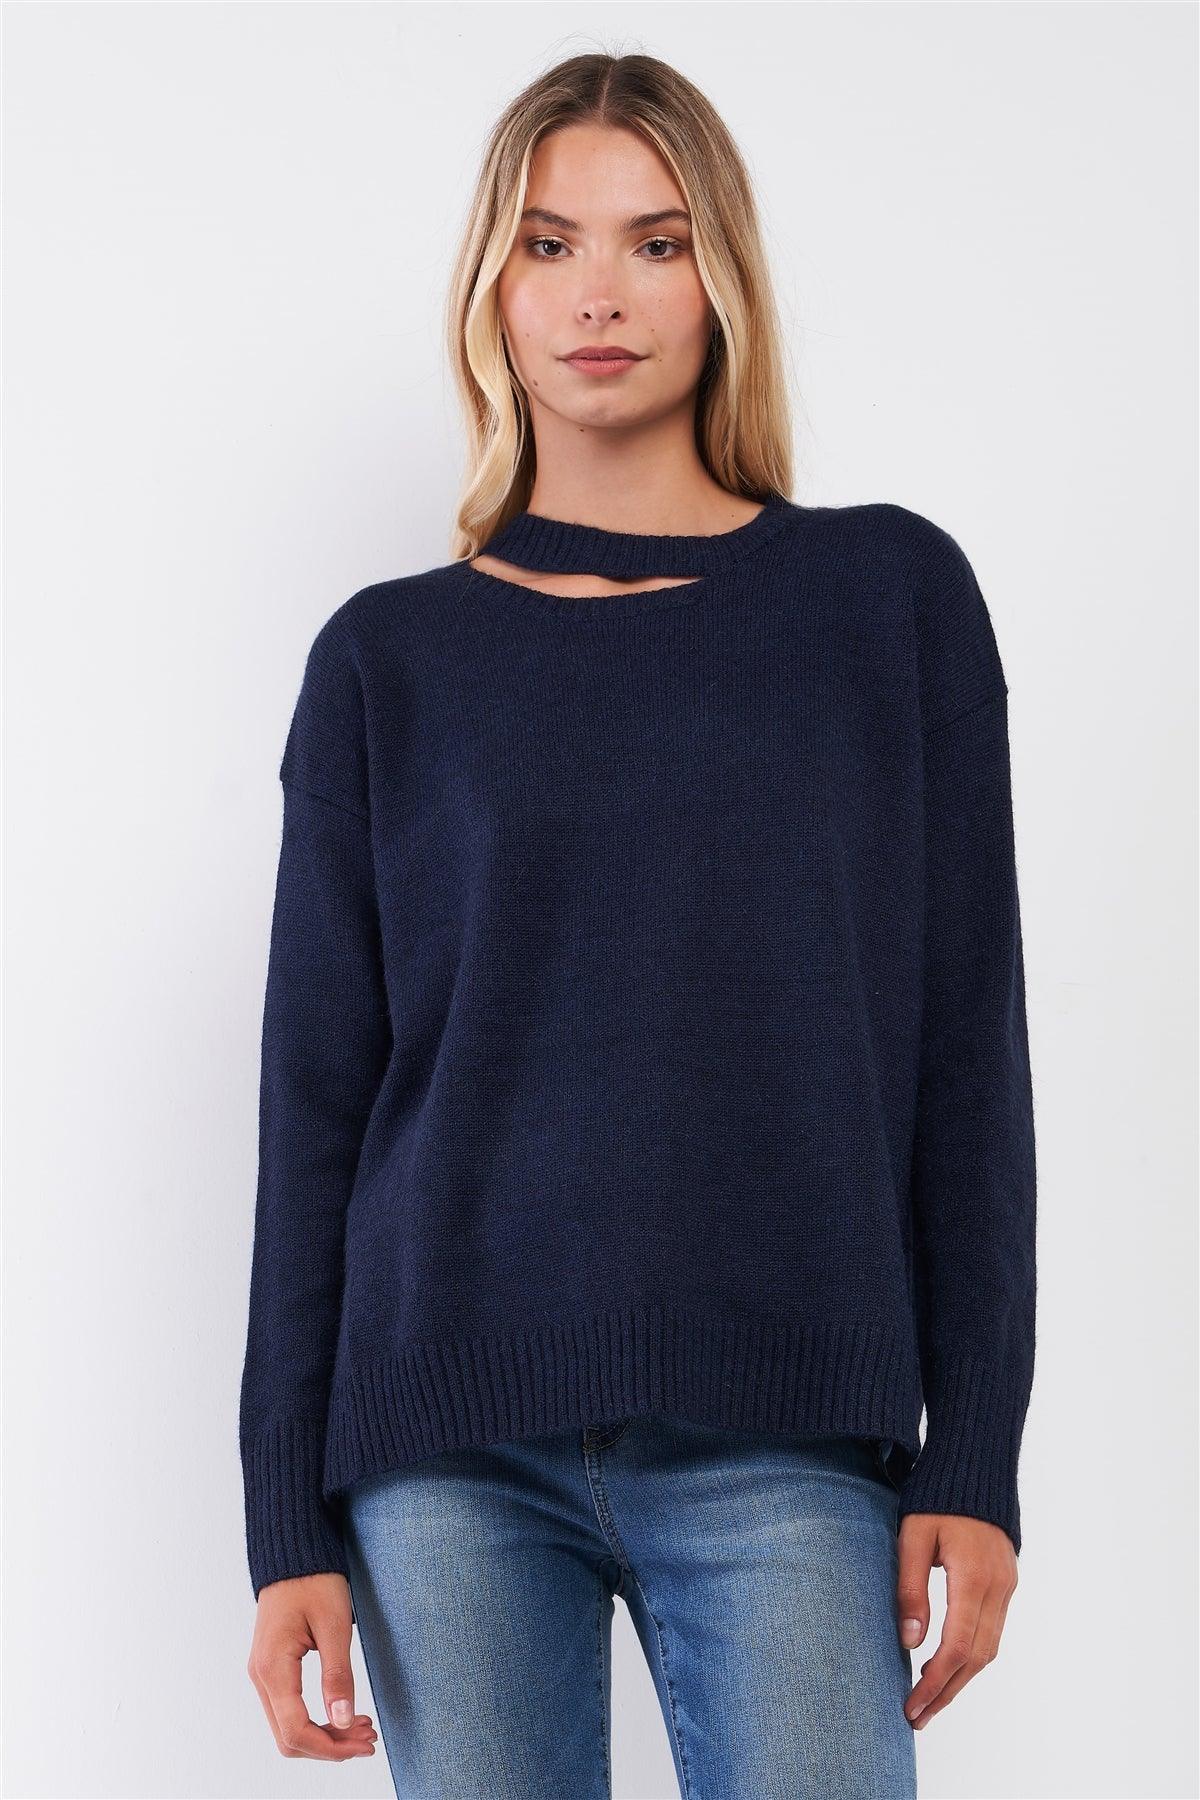 Navy Crew Neck With Cut-Out Detail Long Sleeve Loose Fit Sweater /3-3